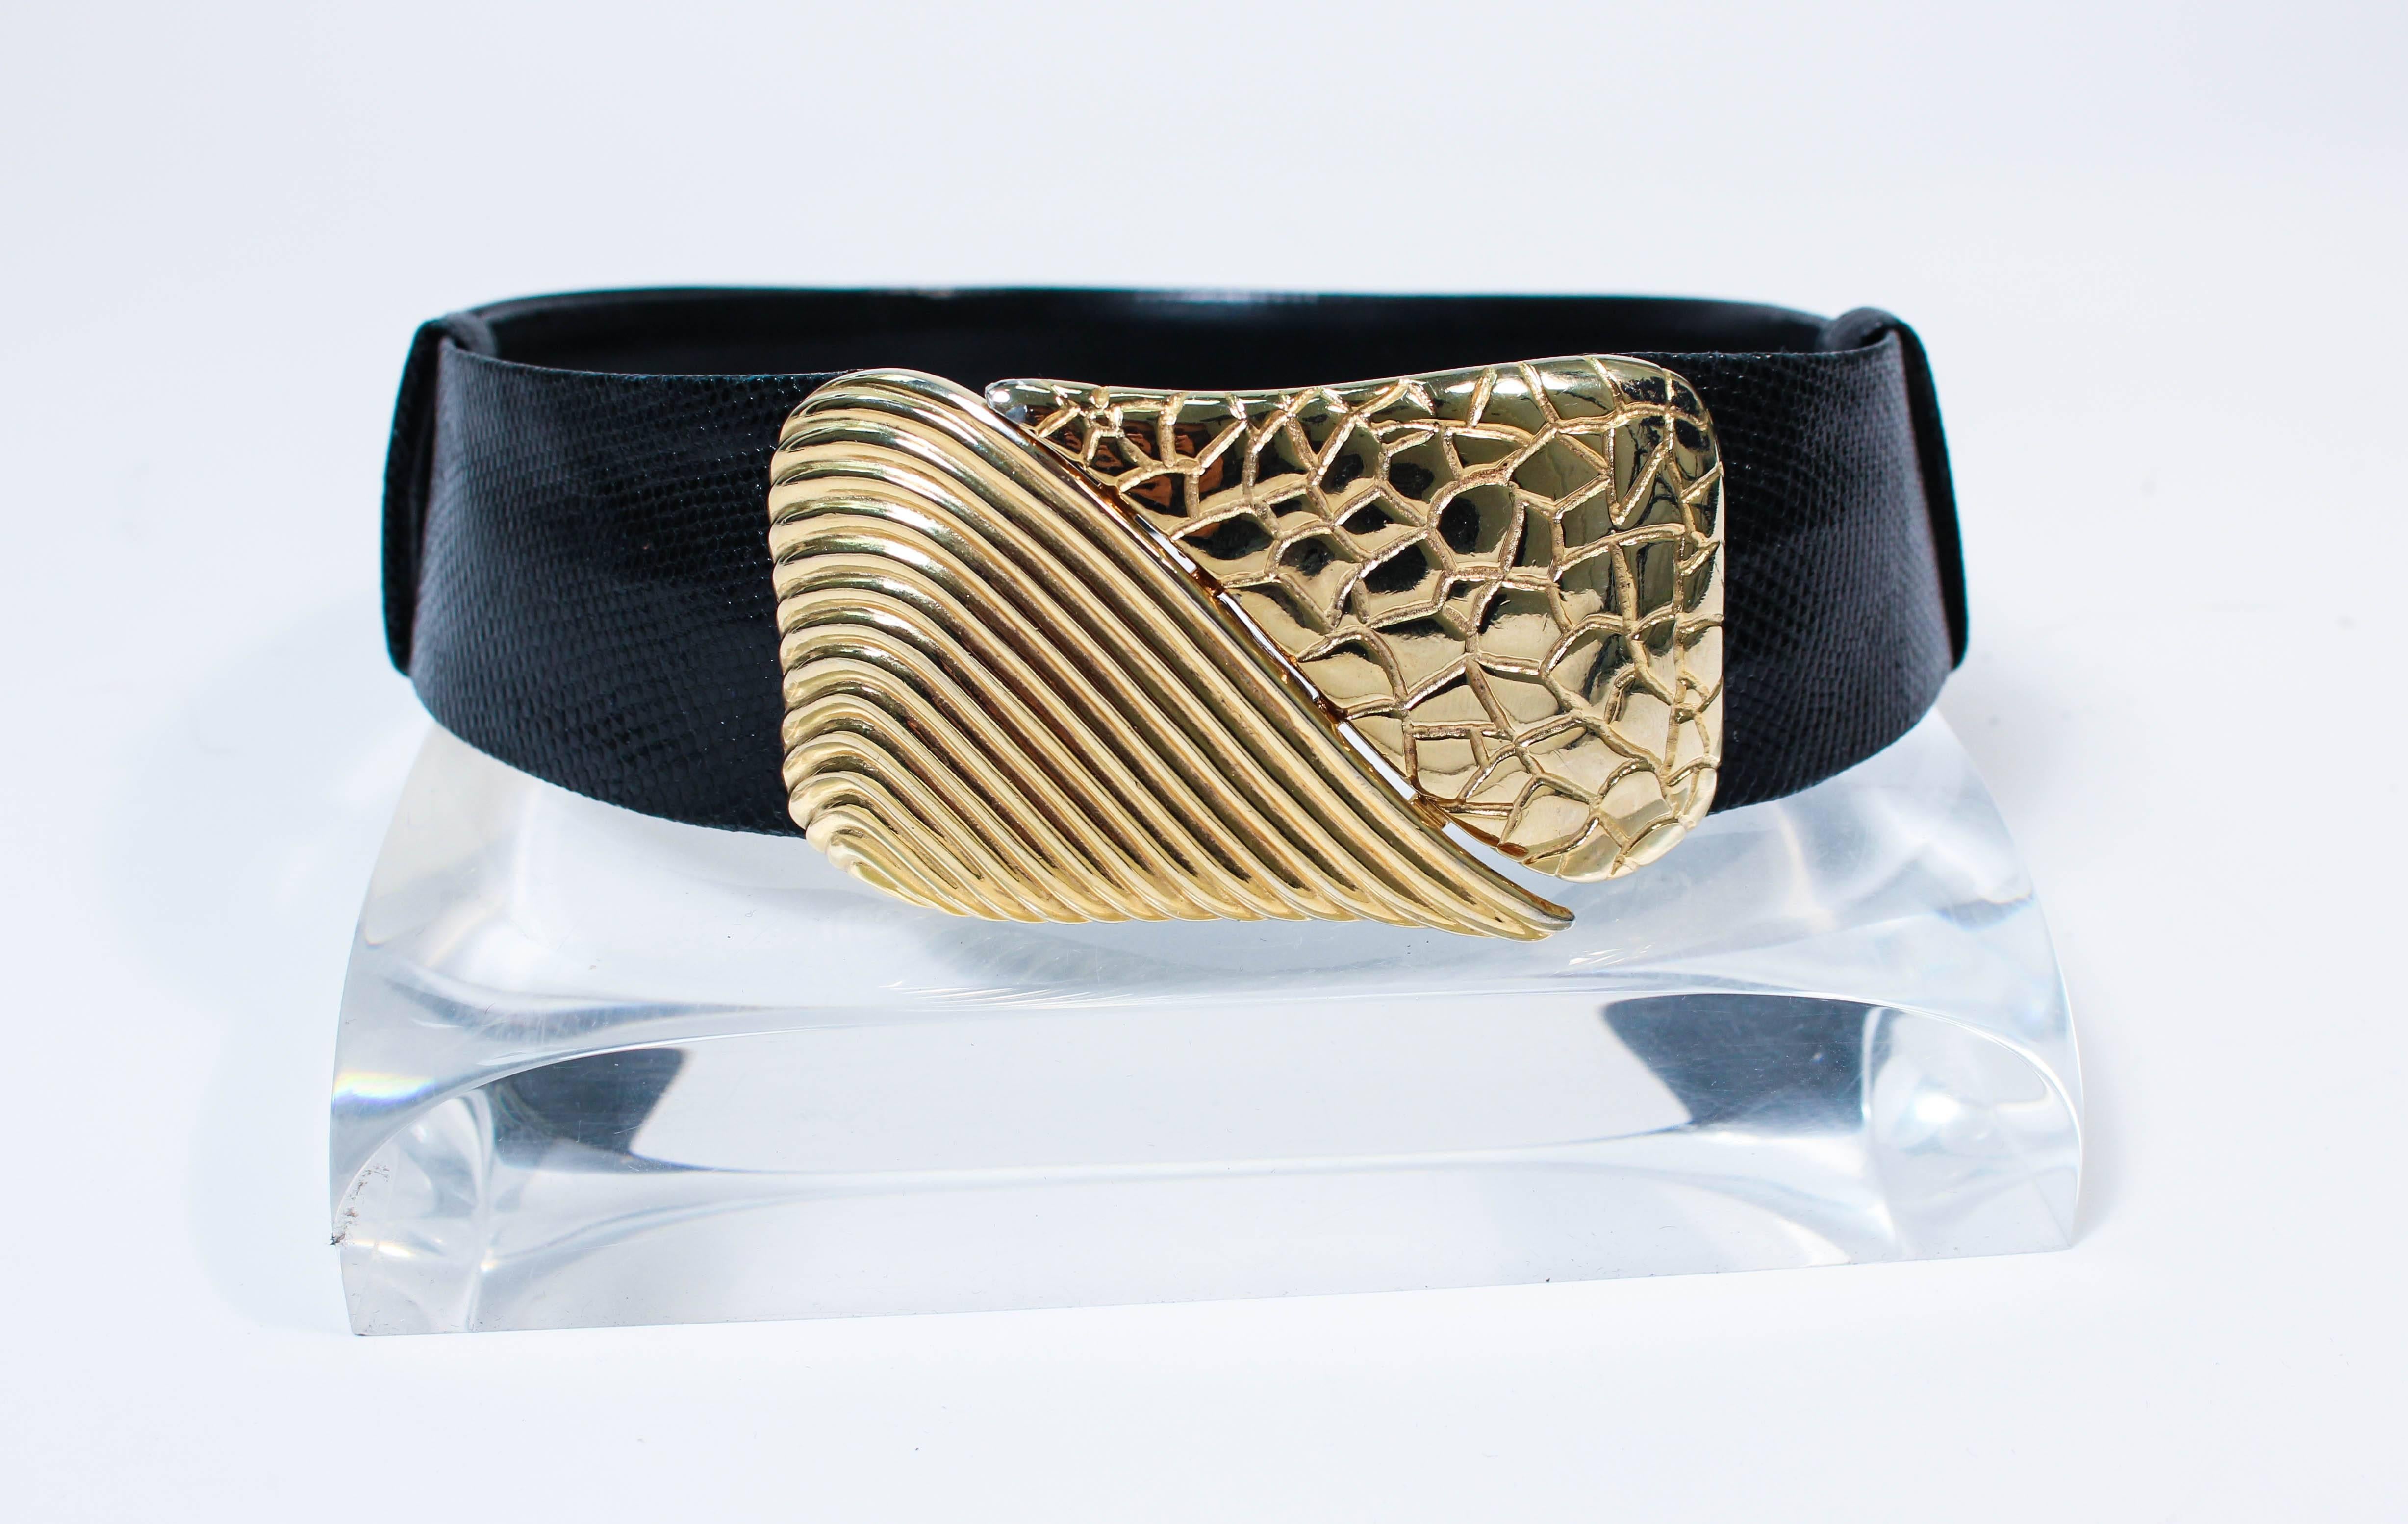 This Judith Leiber bet is composed of a black lizard. Features a stunning large gold hue belt buckle. Optional lengths with slide design. In excellent vintage condition.

**Please cross-reference measurements for personal accuracy. Size in